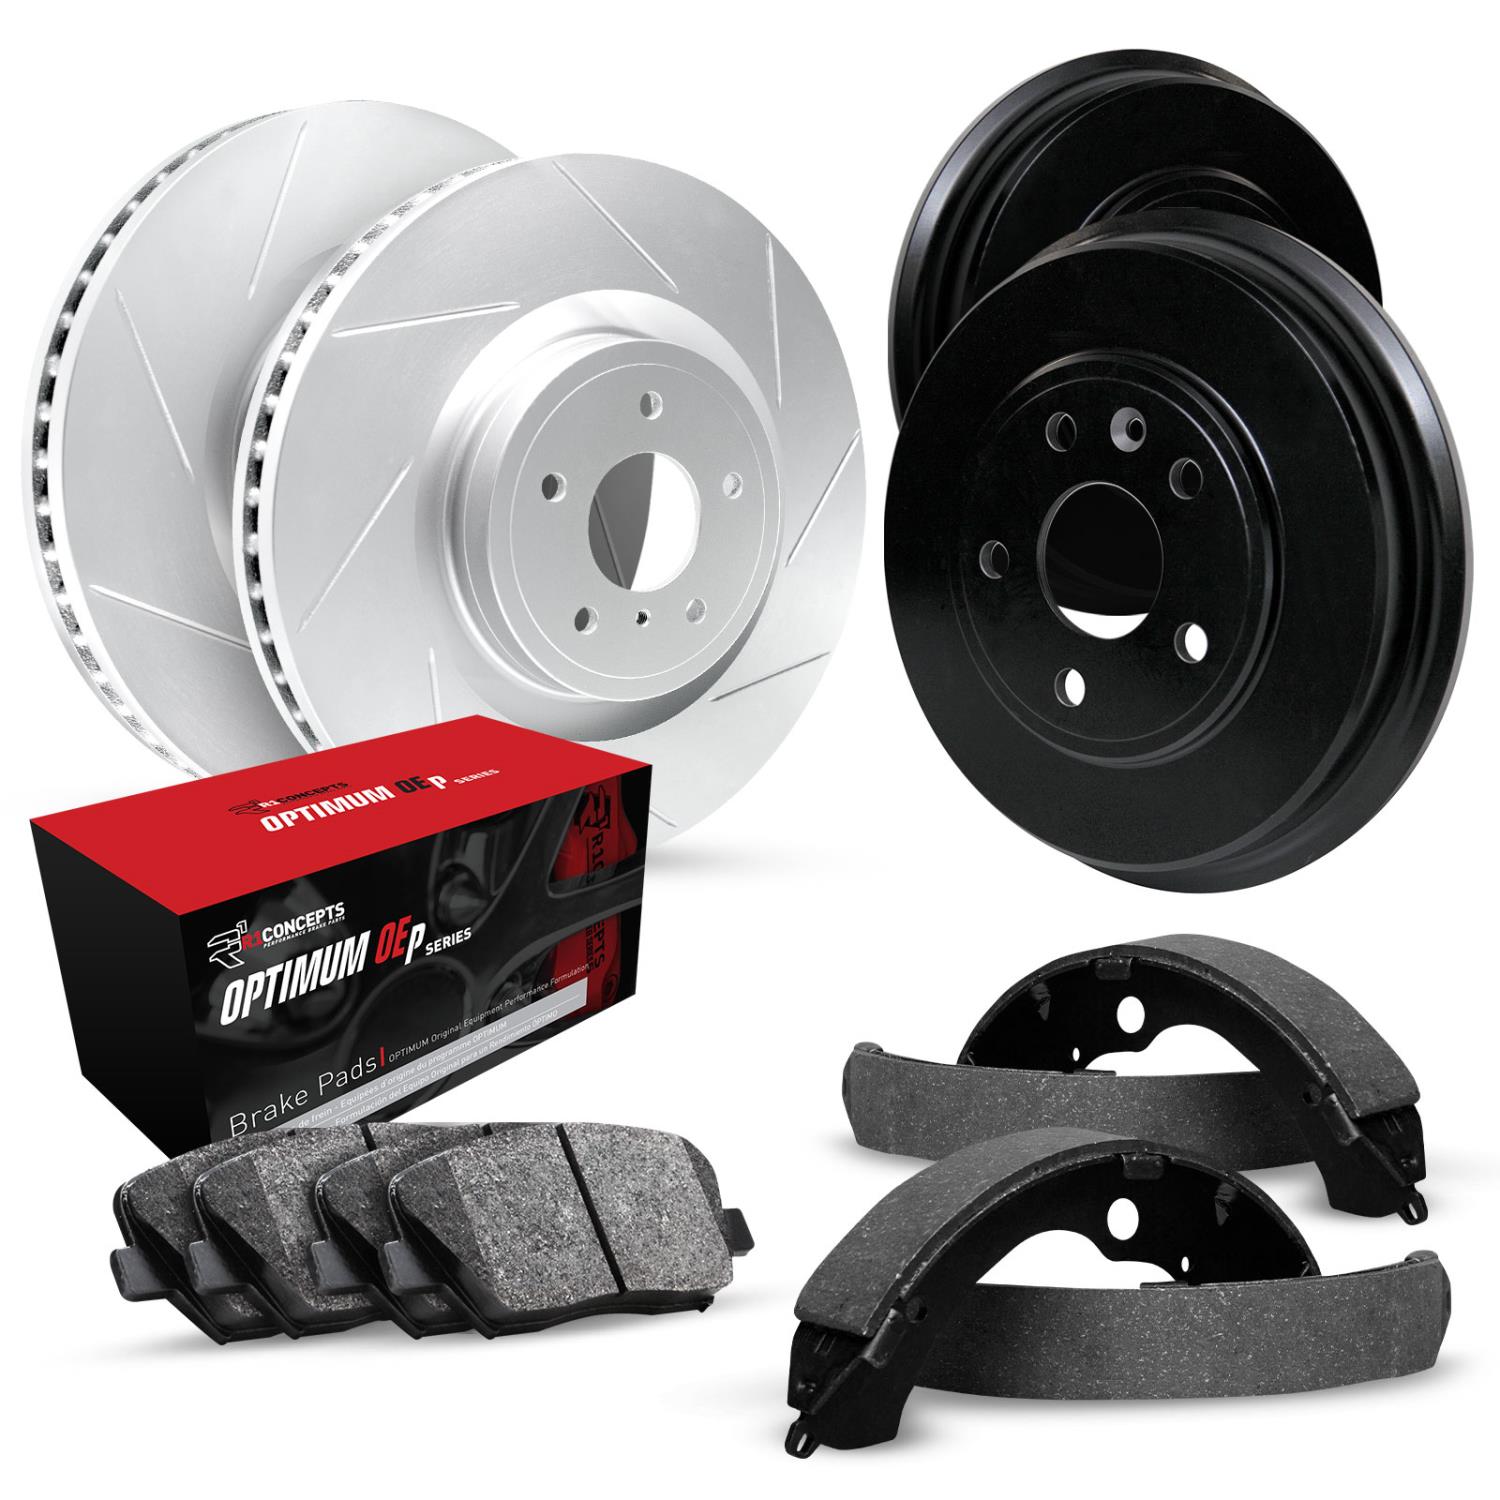 GEO-Carbon Slotted Brake Rotor & Drum Set w/Optimum OE Pads & Shoes, 2008-2009 Lexus/Toyota/Scion, Position: Front & Rear